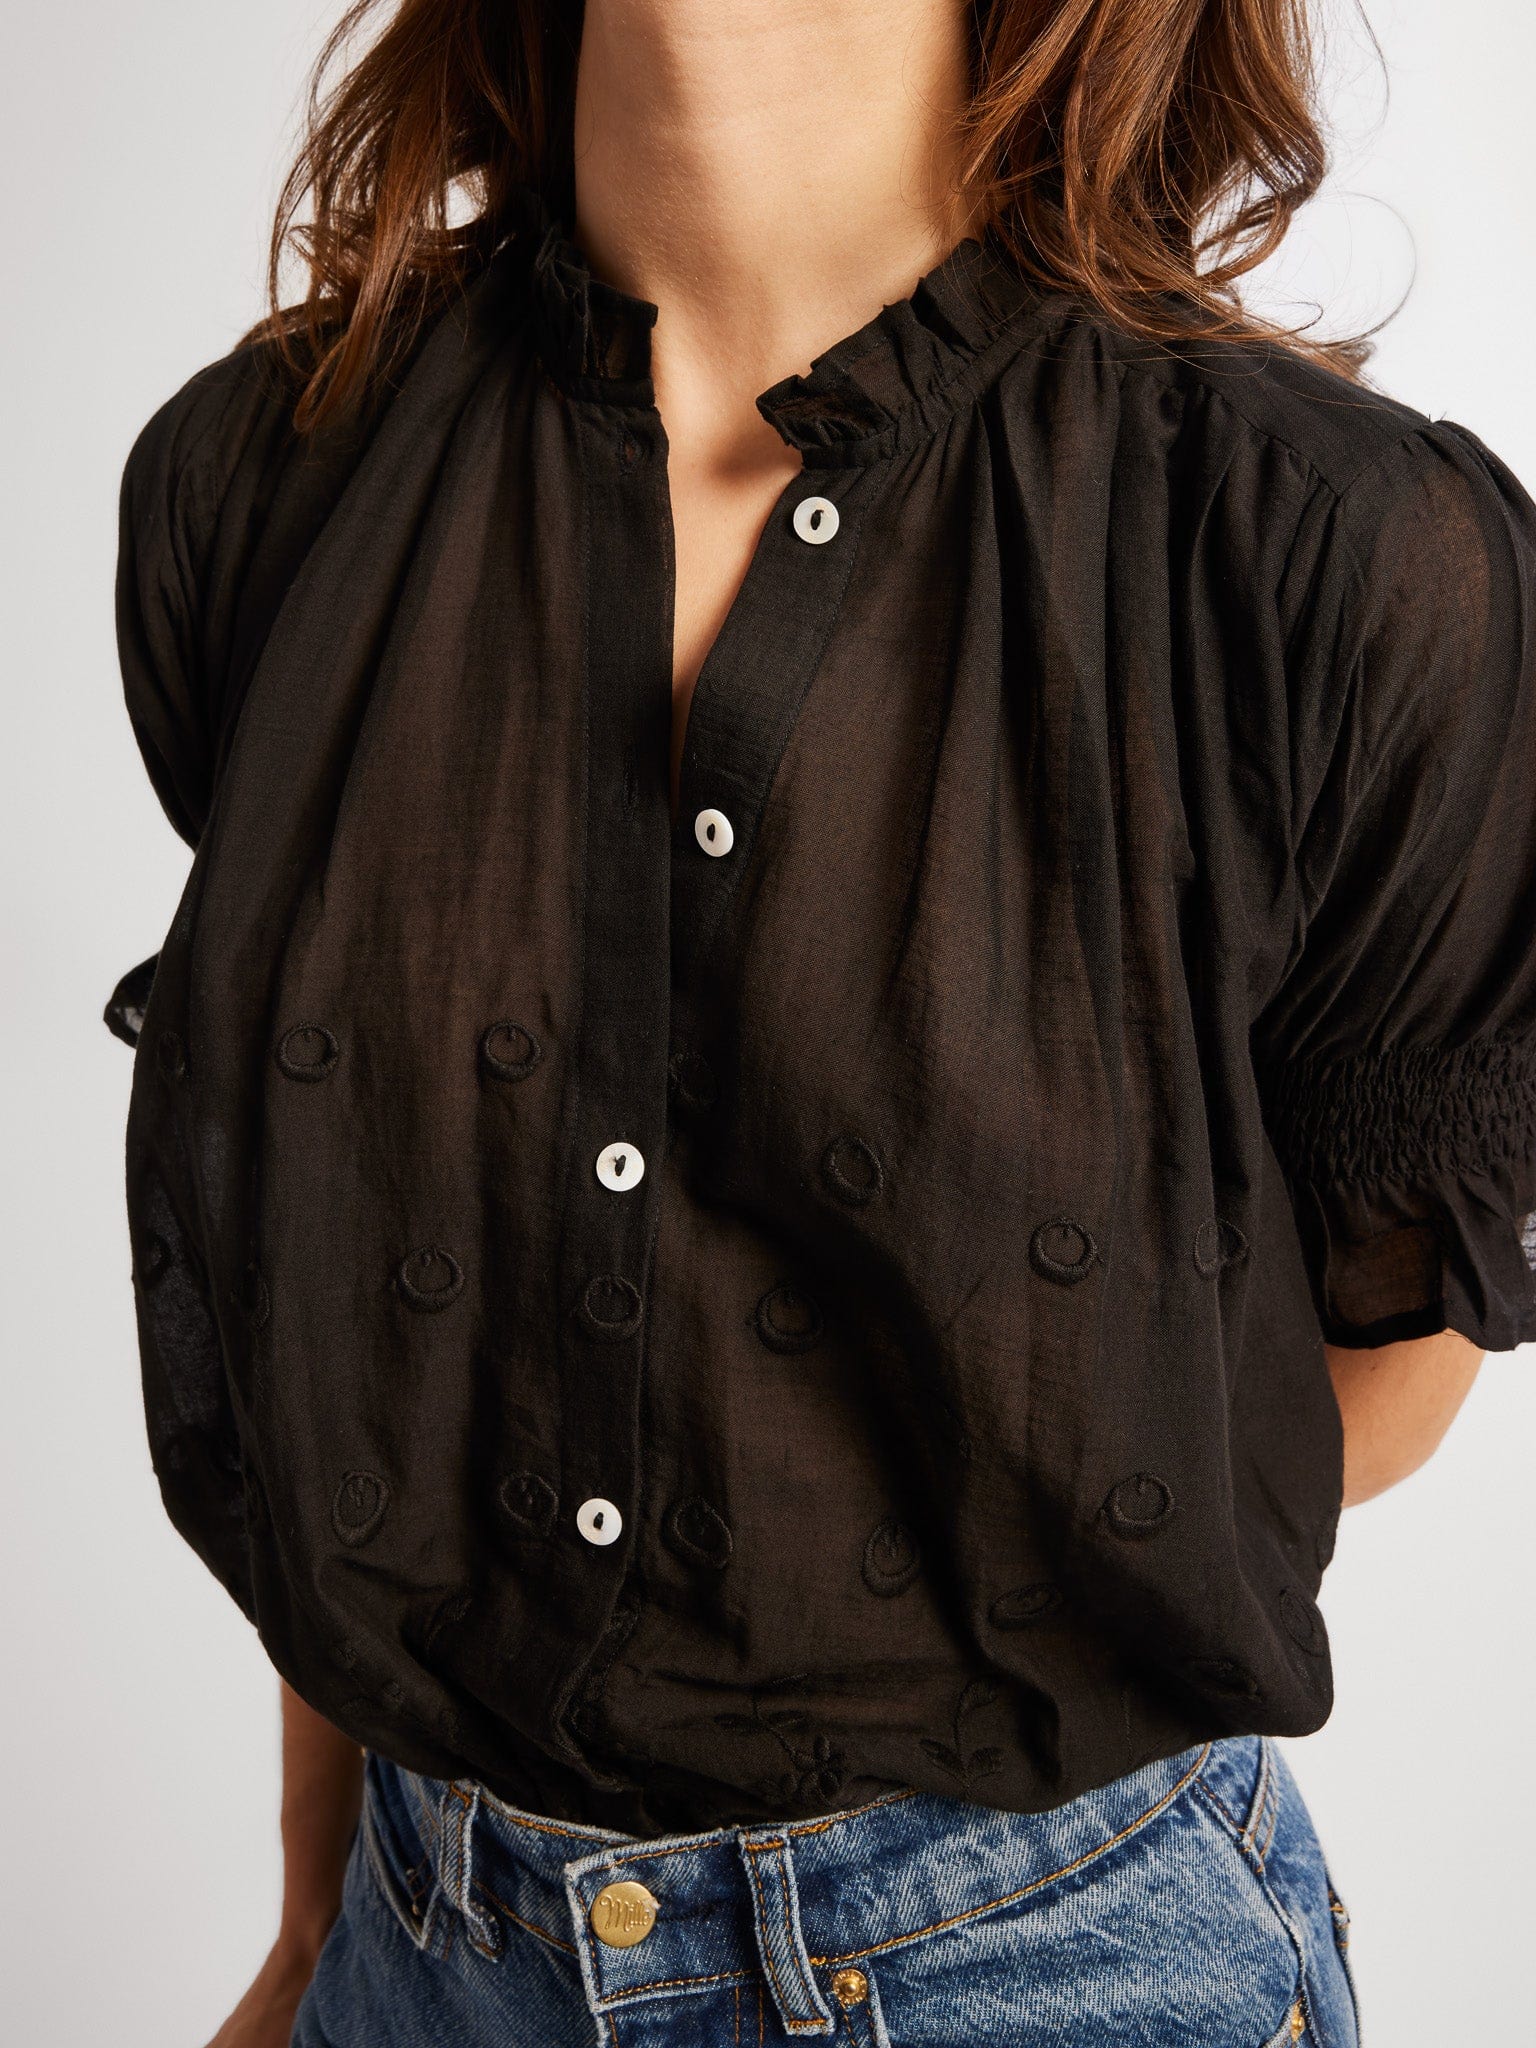 MILLE Clothing Marnie Top in Black Petal Embroidery